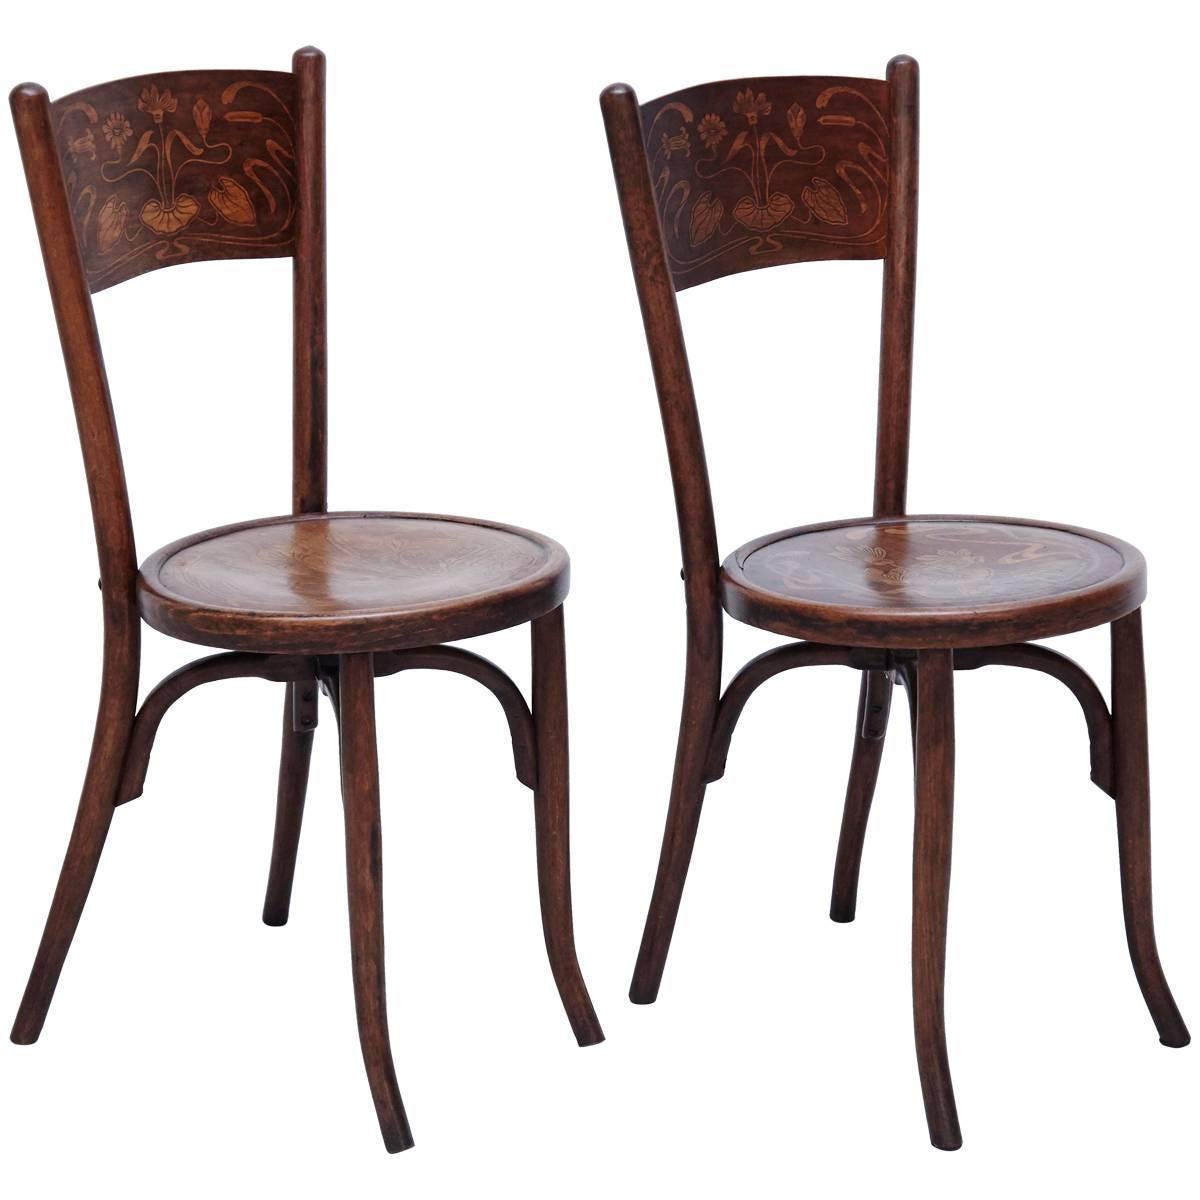 Pair of Chairs in the Style of Thonet by Codina, circa 1900